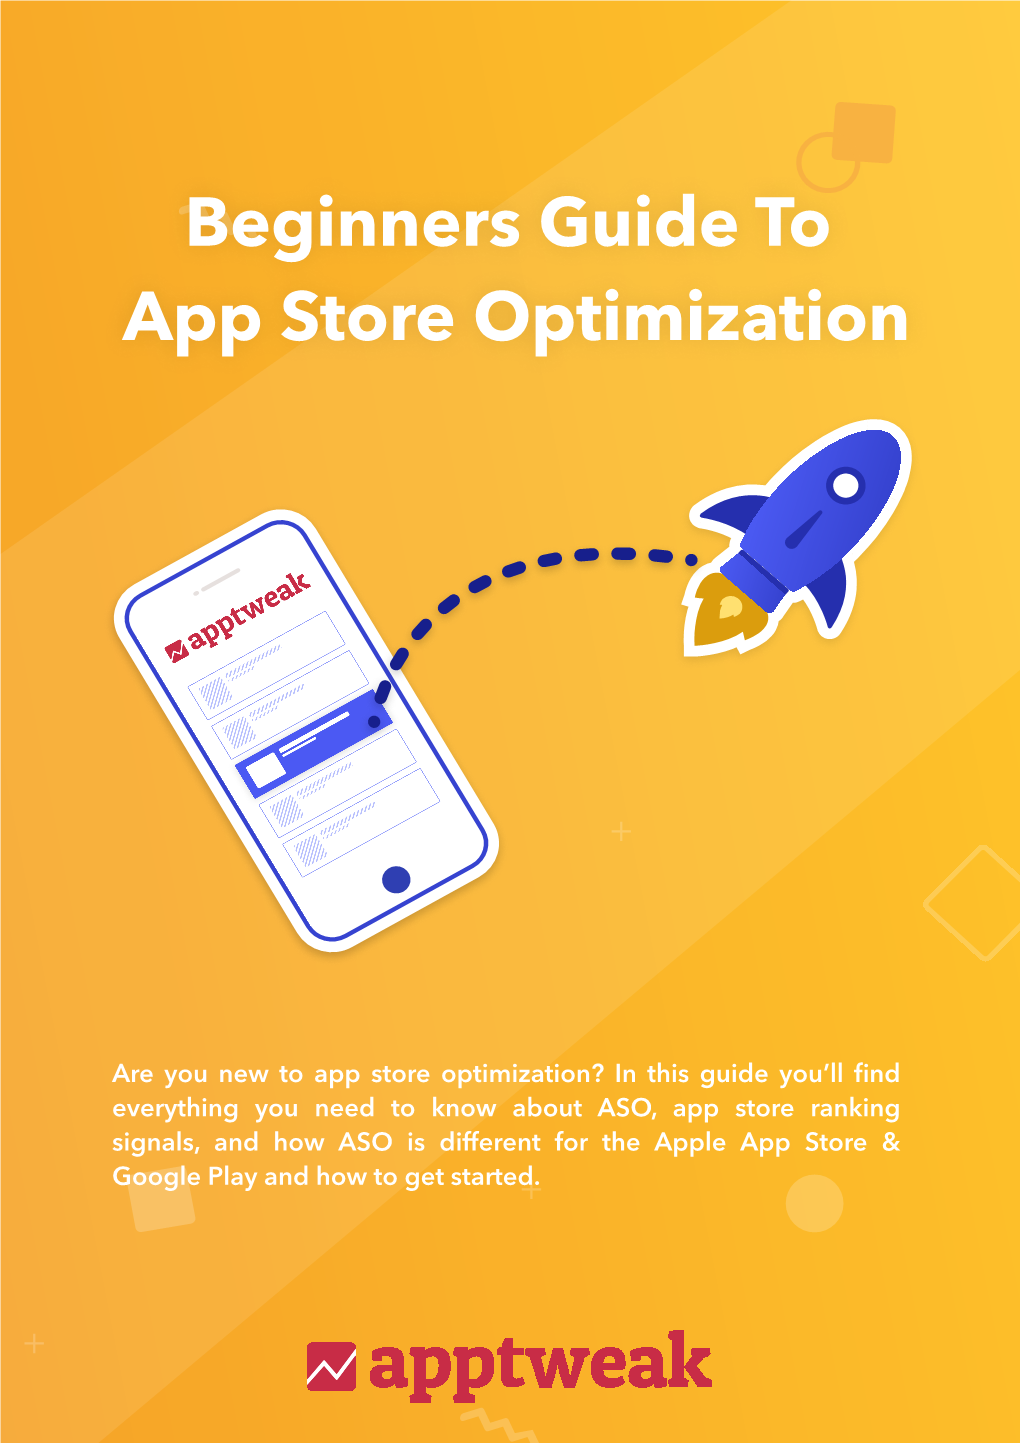 Beginners Guide to App Store Optimization